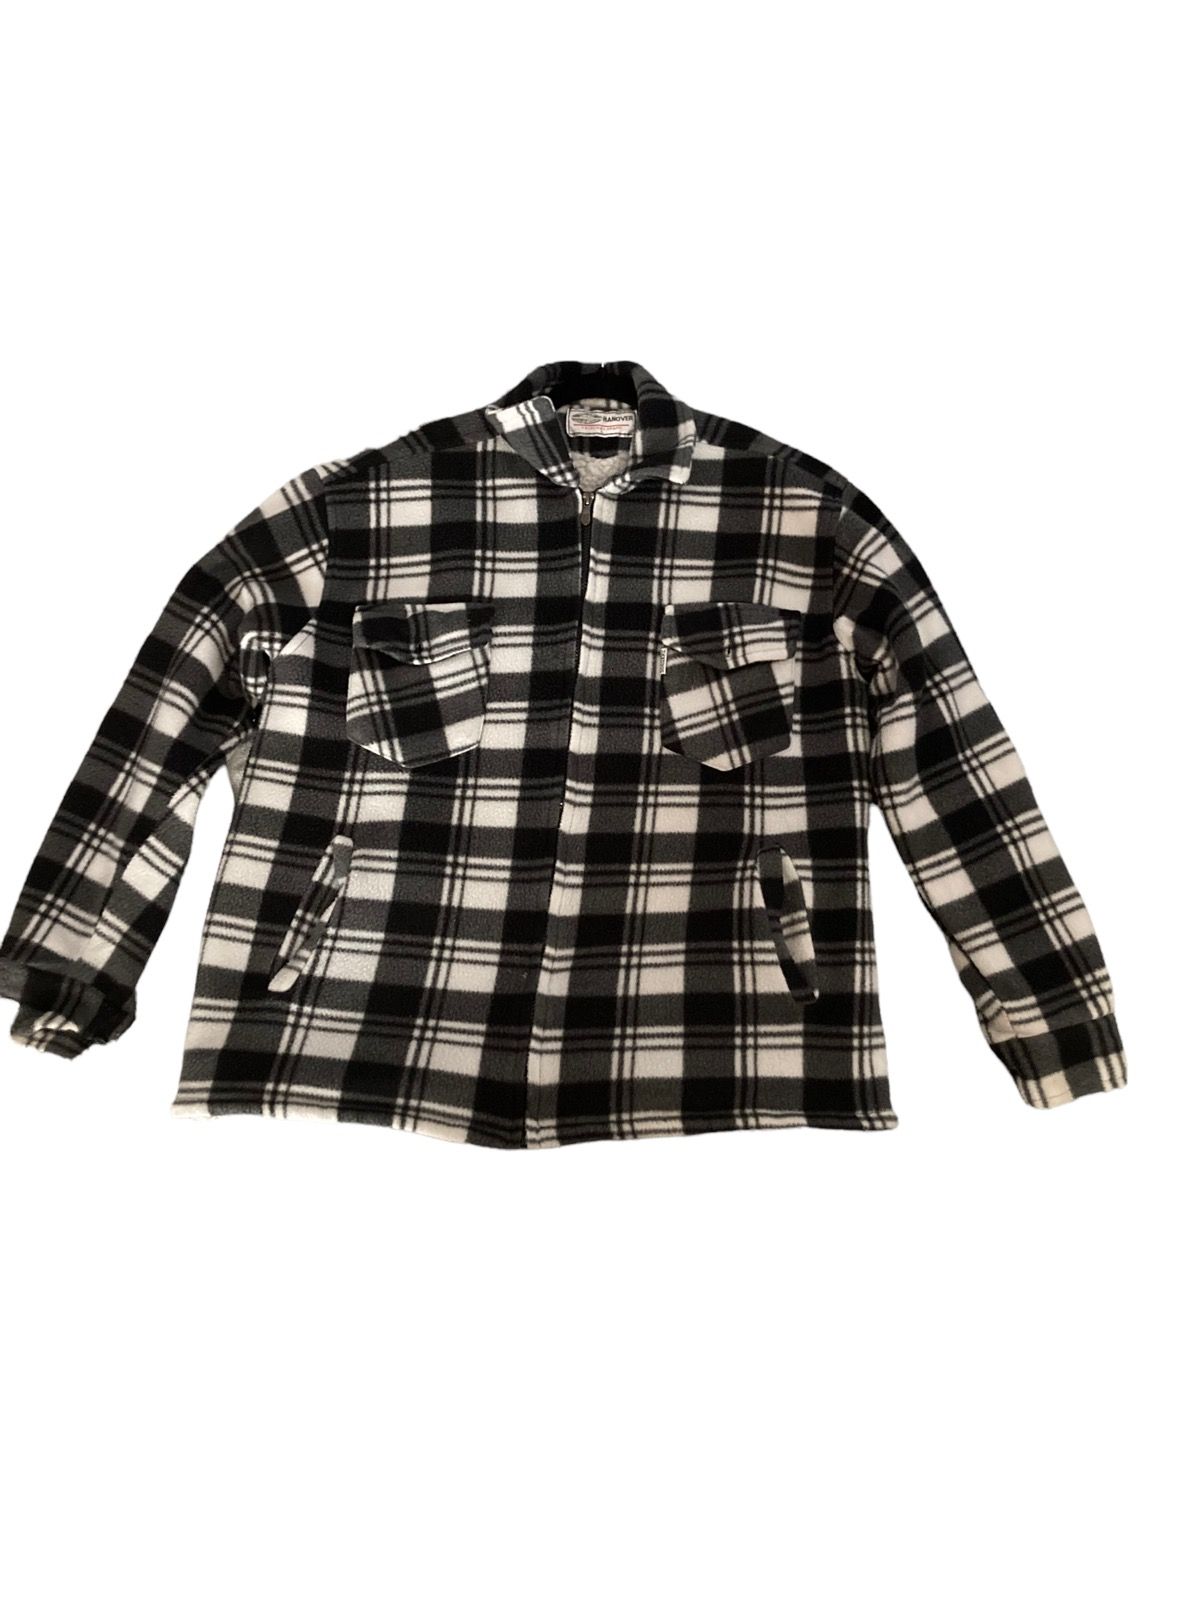 Hanover Hanover Flannel Size US L / EU 52-54 / 3 - 1 Preview